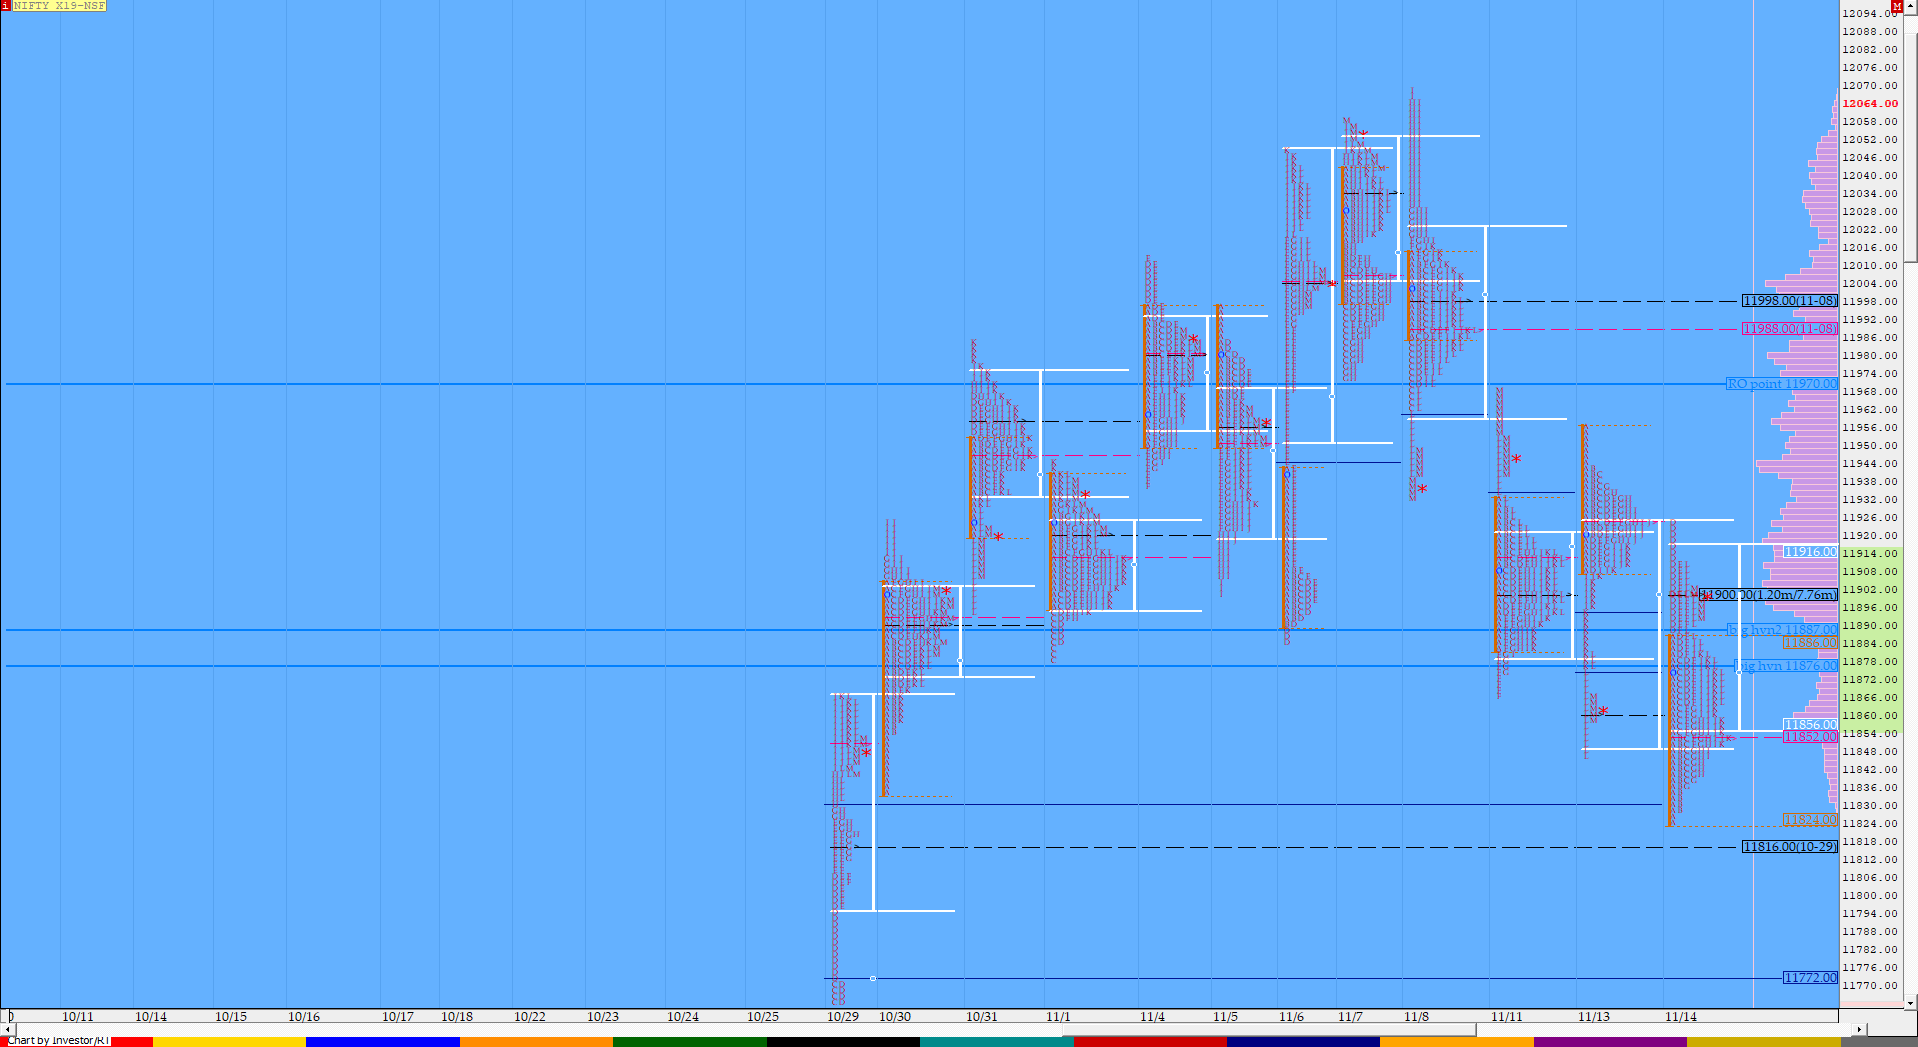 Nf Compo1 9 Market Profile Analysis Dated 14Th November Banknifty Futures, Charts, Day Trading, Intraday Trading, Intraday Trading Strategies, Market Profile, Market Profile Trading Strategies, Nifty Futures, Order Flow Analysis, Support And Resistance, Technical Analysis, Trading Strategies, Volume Profile Trading